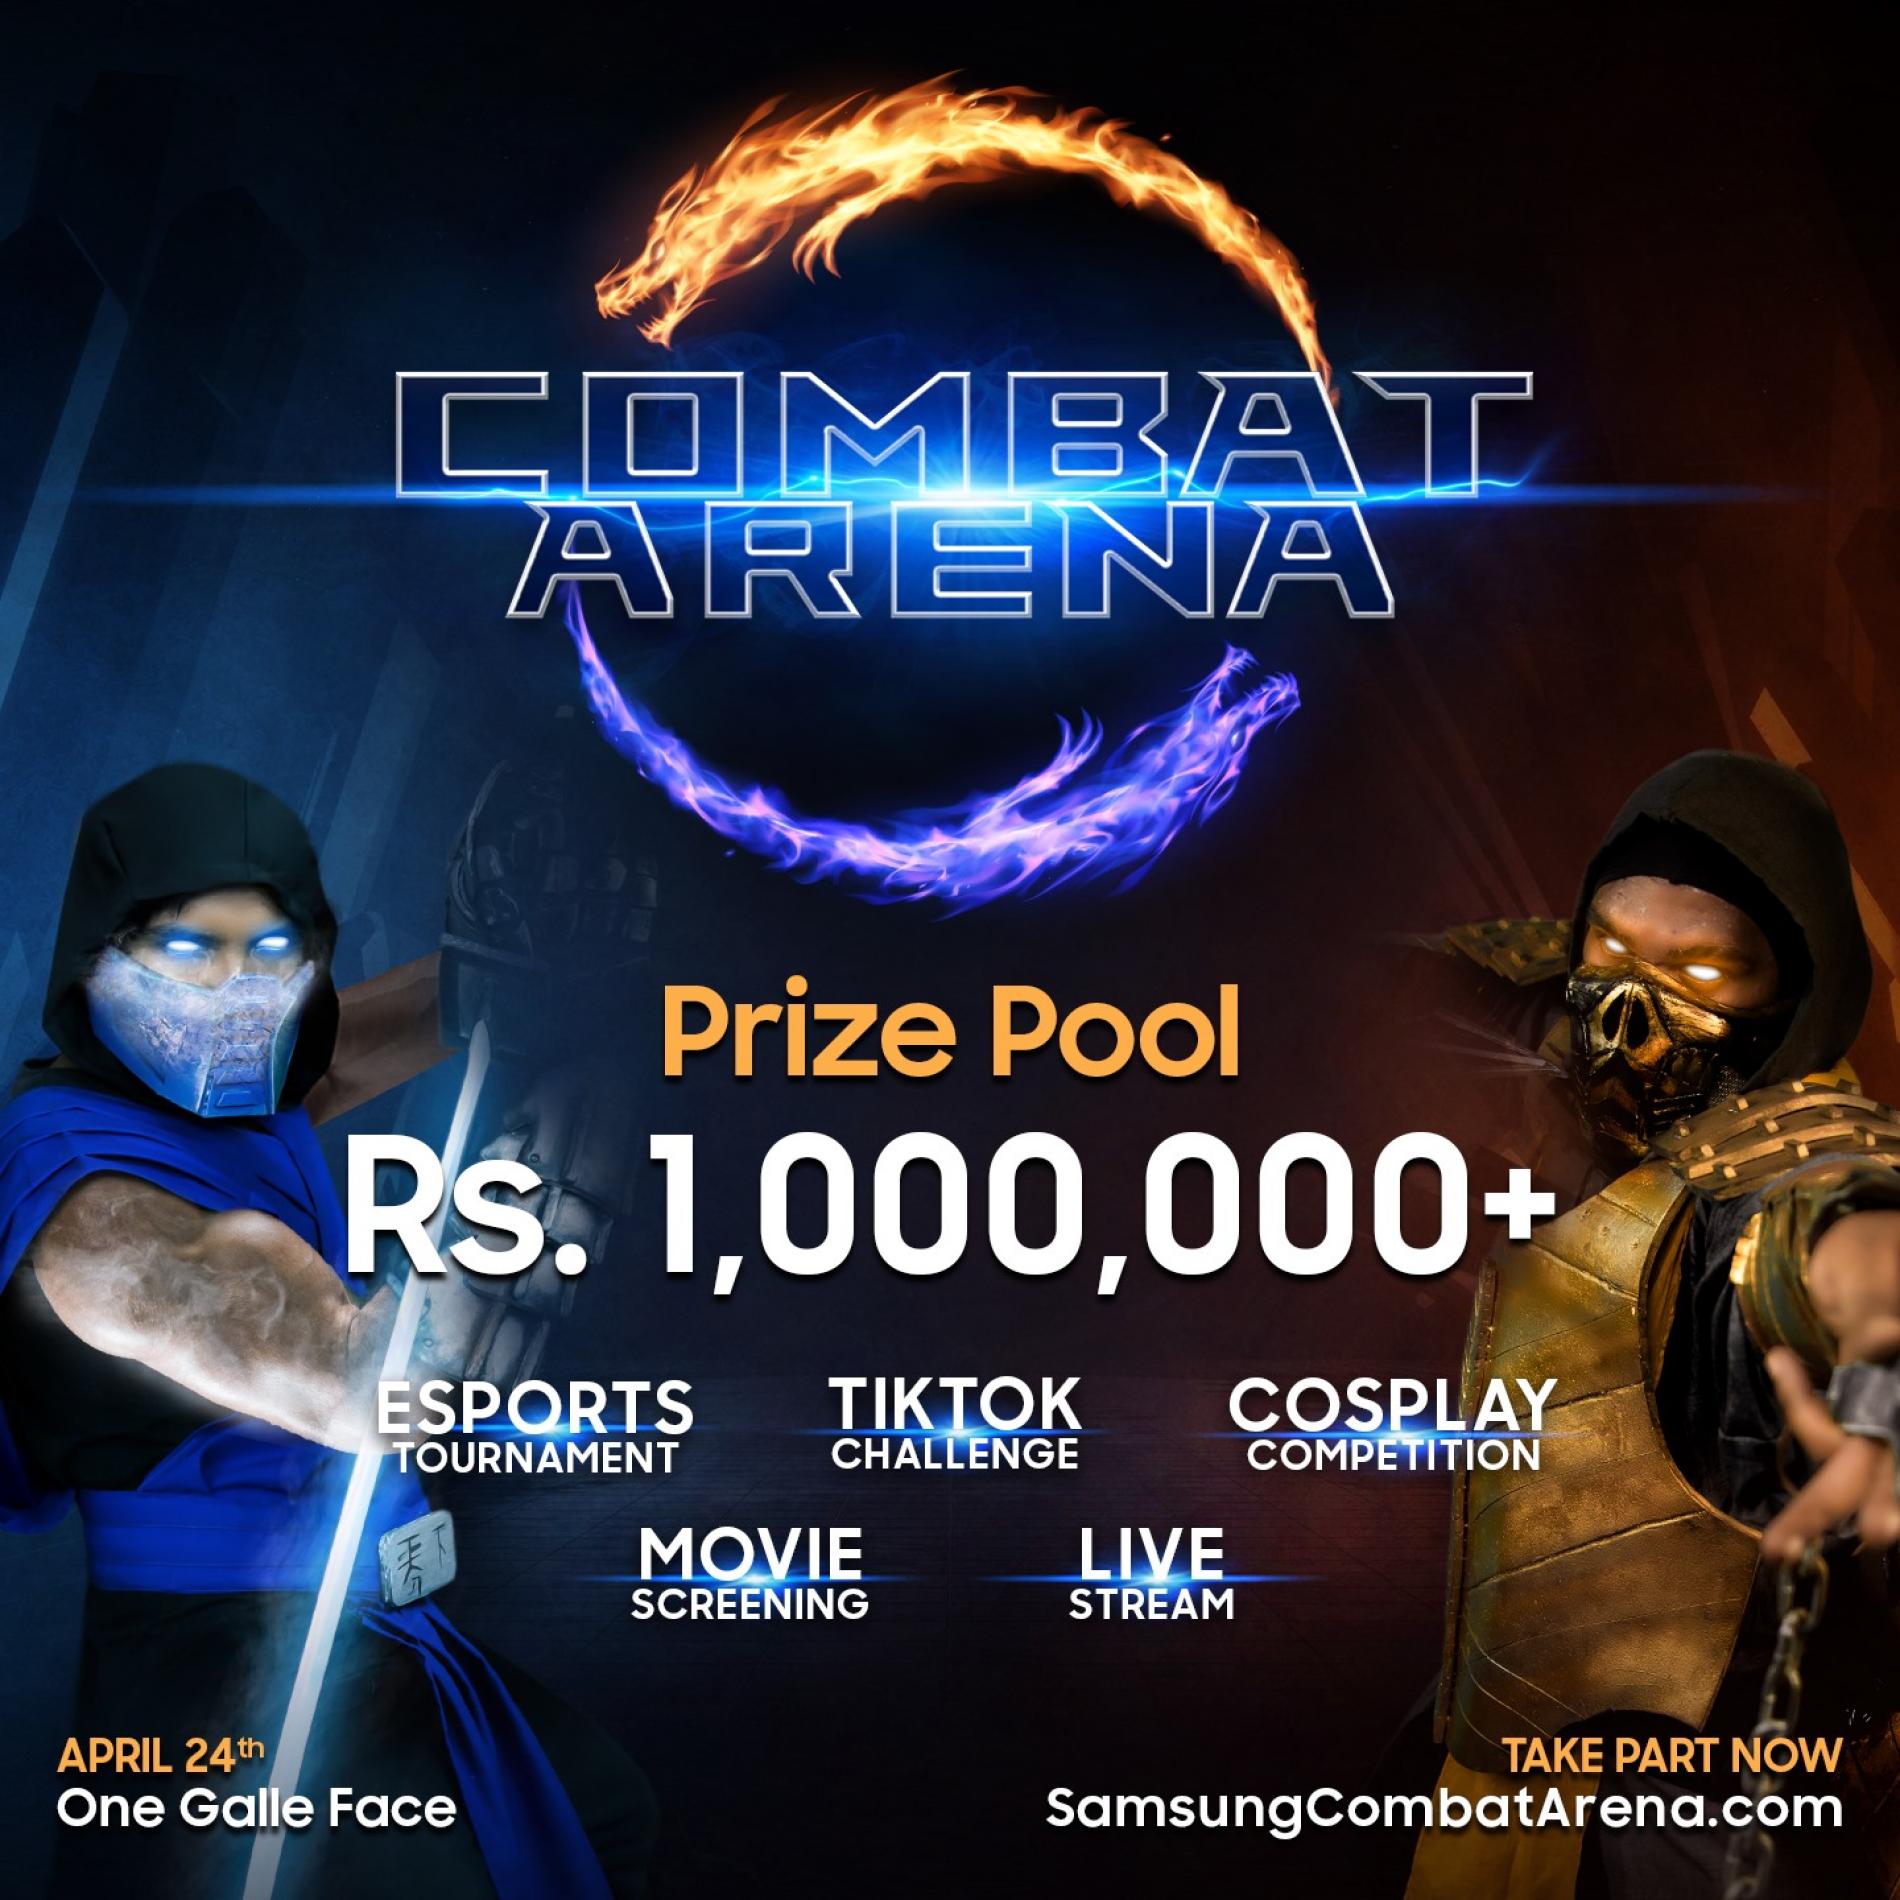 The Biggest Prize Pool For A Fighting Games Championship In Sri Lanka.